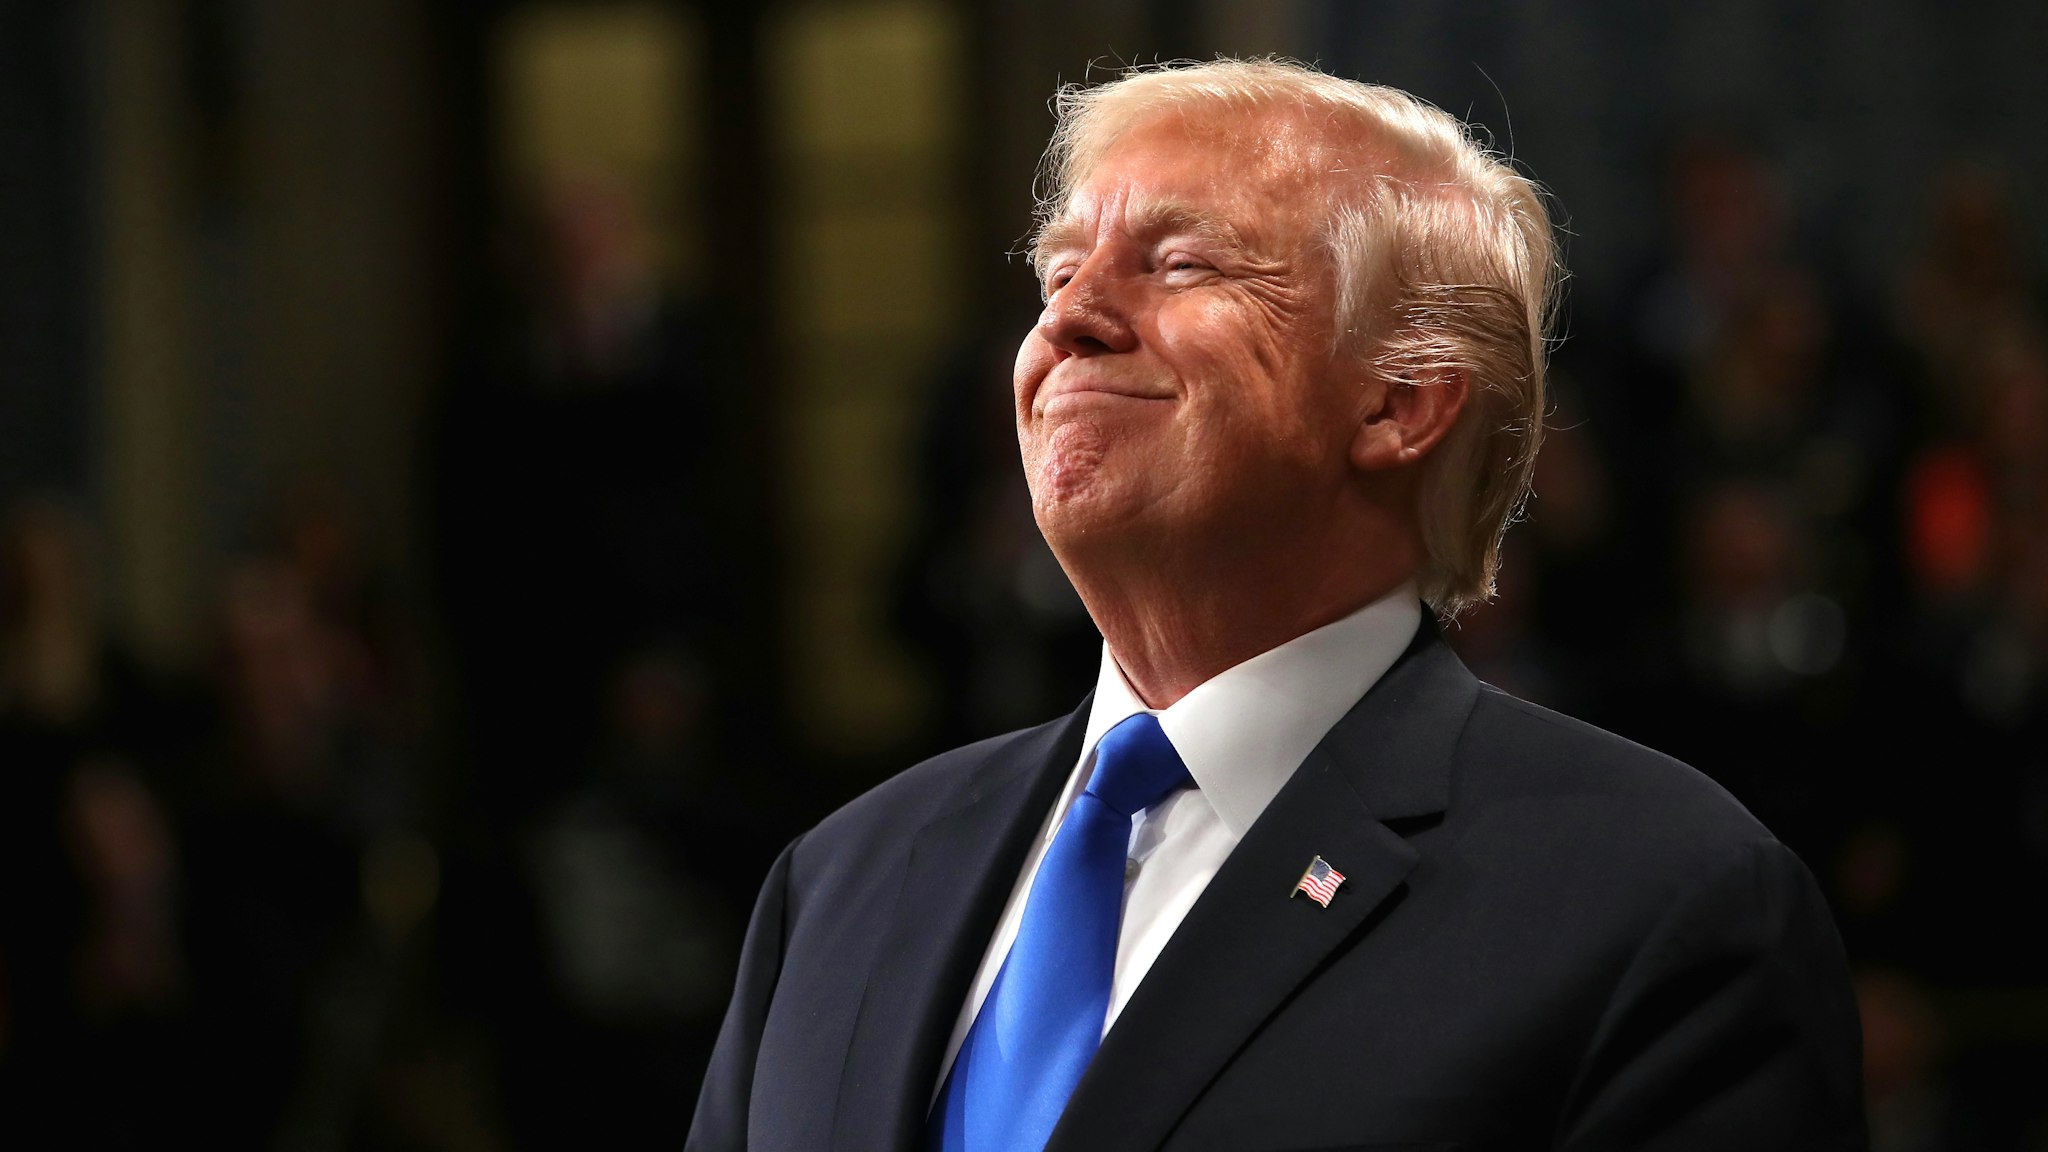 WASHINGTON, DC - JANUARY 30: U.S. President Donald J. Trump smiles during the State of the Union address in the chamber of the U.S. House of Representatives January 30, 2018 in Washington, DC. This is the first State of the Union address given by U.S. President Donald Trump and his second joint-session address to Congress.